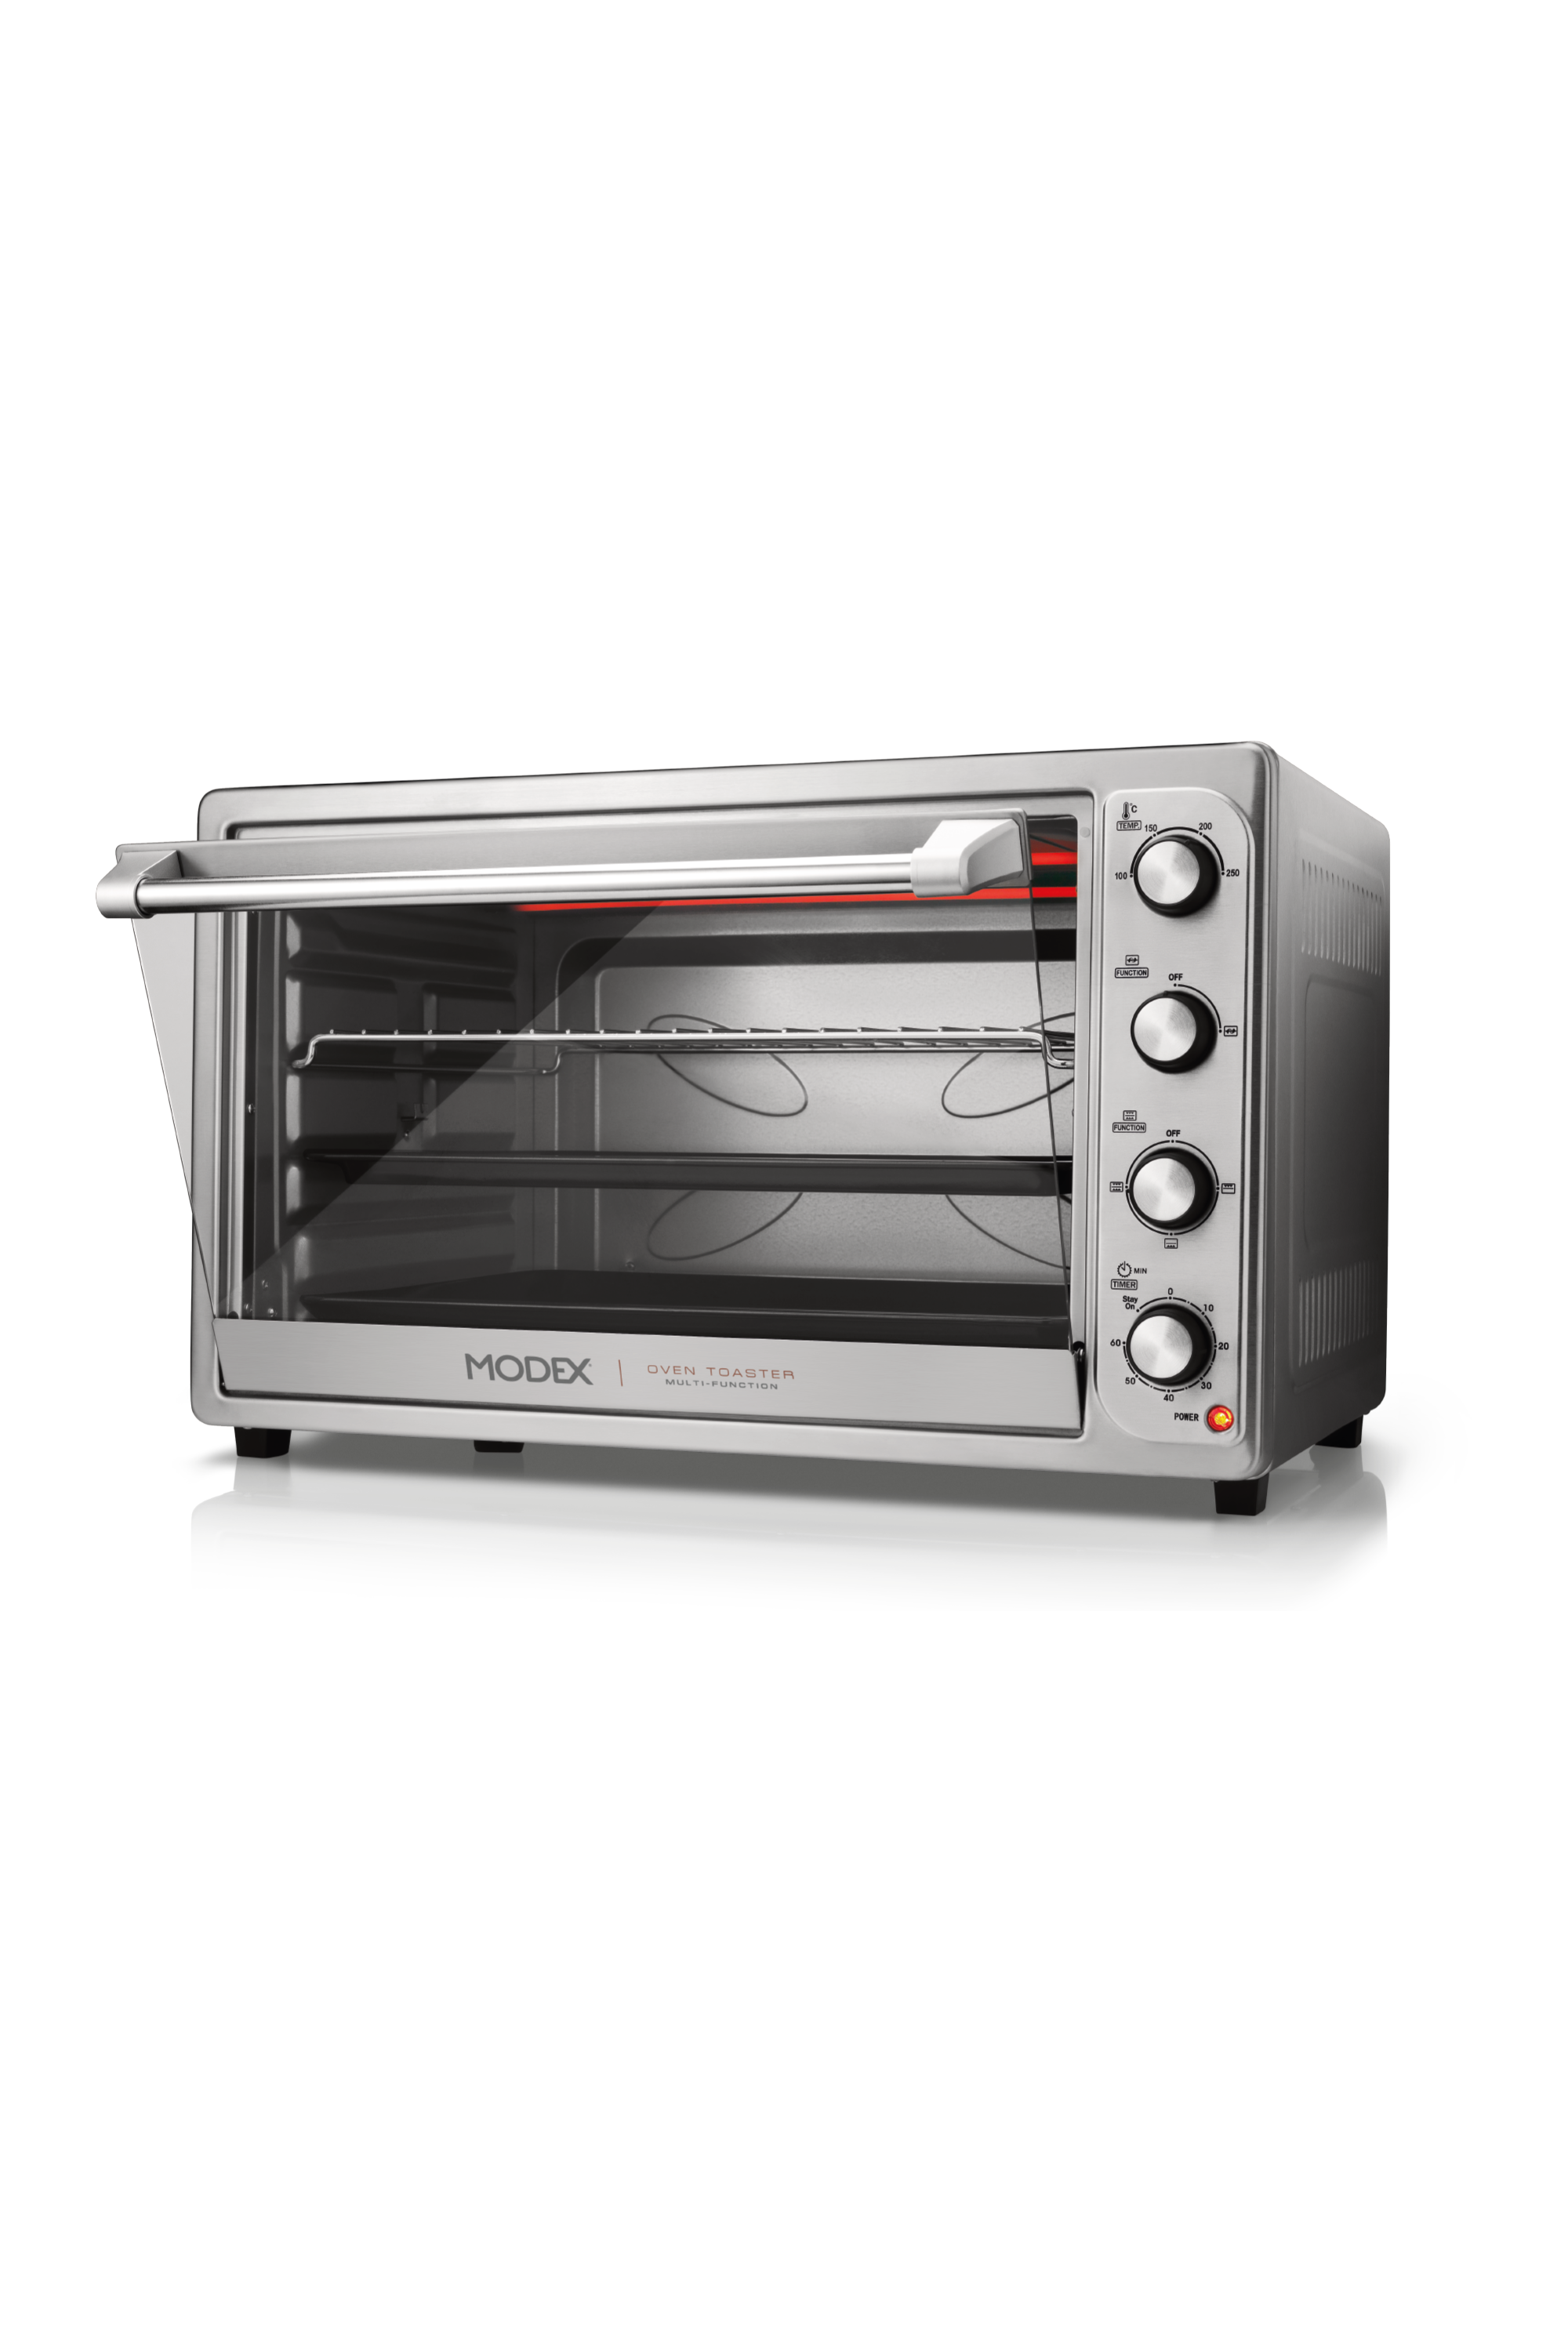 Ov9660 66L Electrical Oven